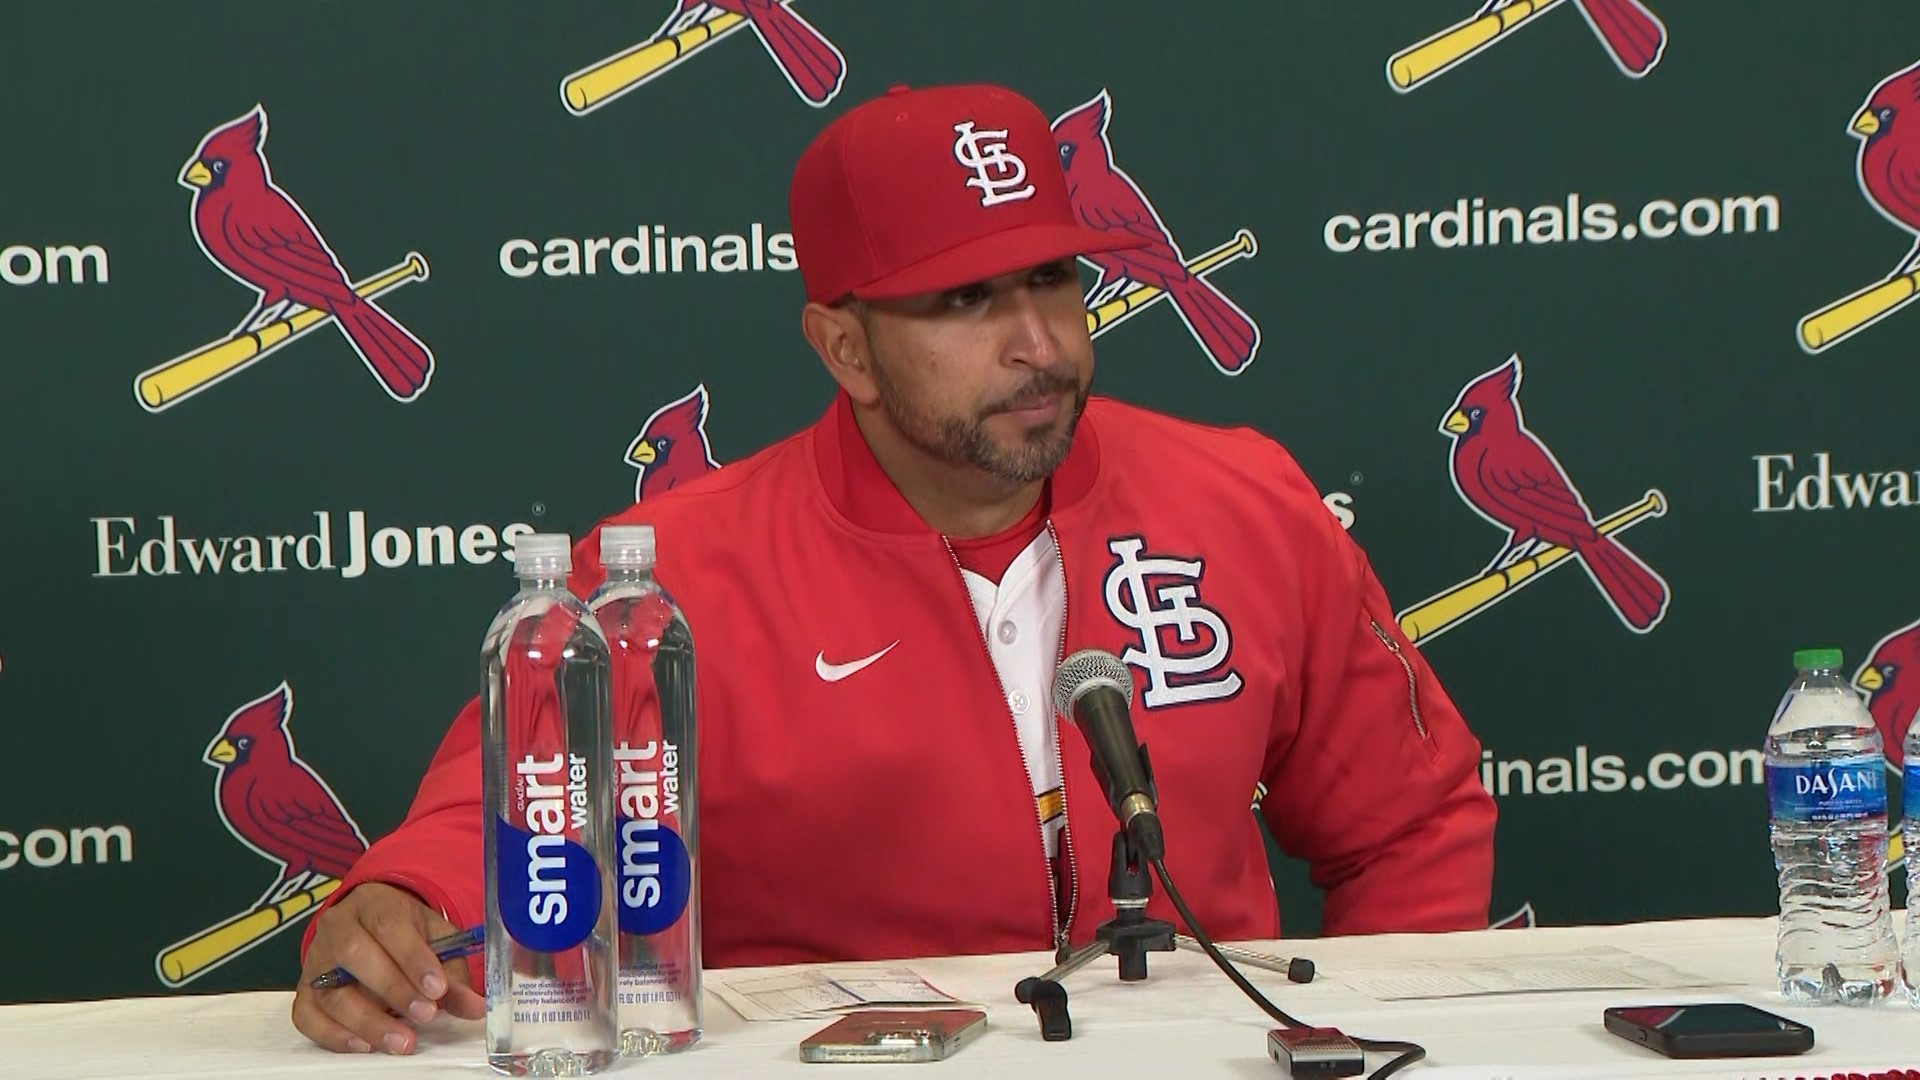 St. Louis Cardinals manager Oliver Marmol met with members of the media after Friday night's 2-1 loss to the Milwaukee Brewers at Busch Stadium.